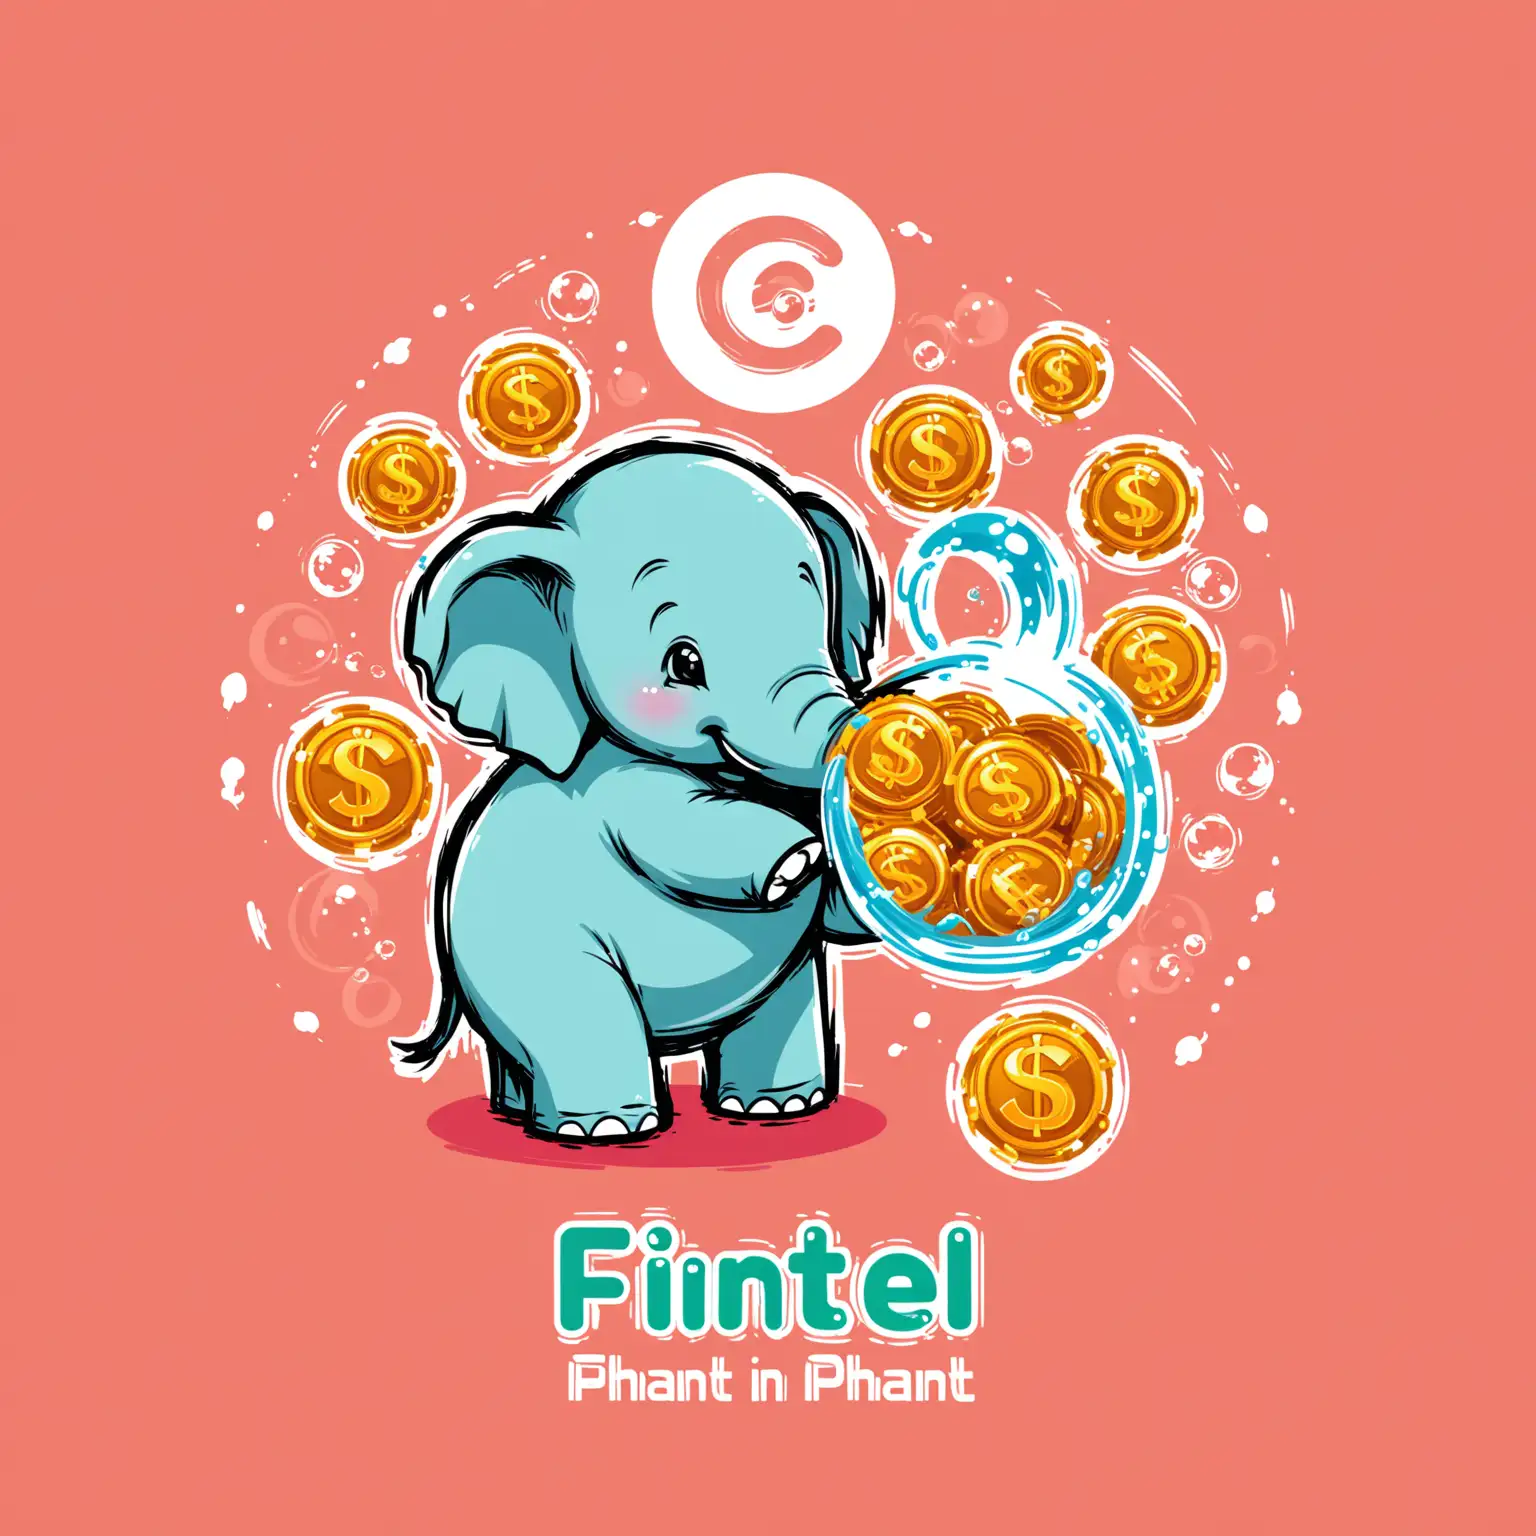 Logoerstellung, Name des unternehmen Fintel-phant in rot gehalten. unternehmen ist ein Finanzdienstleister, welcher kinder den Umgang mit Geld zeigen wollen: Name der Firma_-Fintel-Phant. put more colors and some signs for kids. The elephant throws money over his back as if he wanted to cool himself down with water: Claim in the picture: Fintel-phant. Elehant stands for: 

prosperity, power, strength, memory, wisdom


